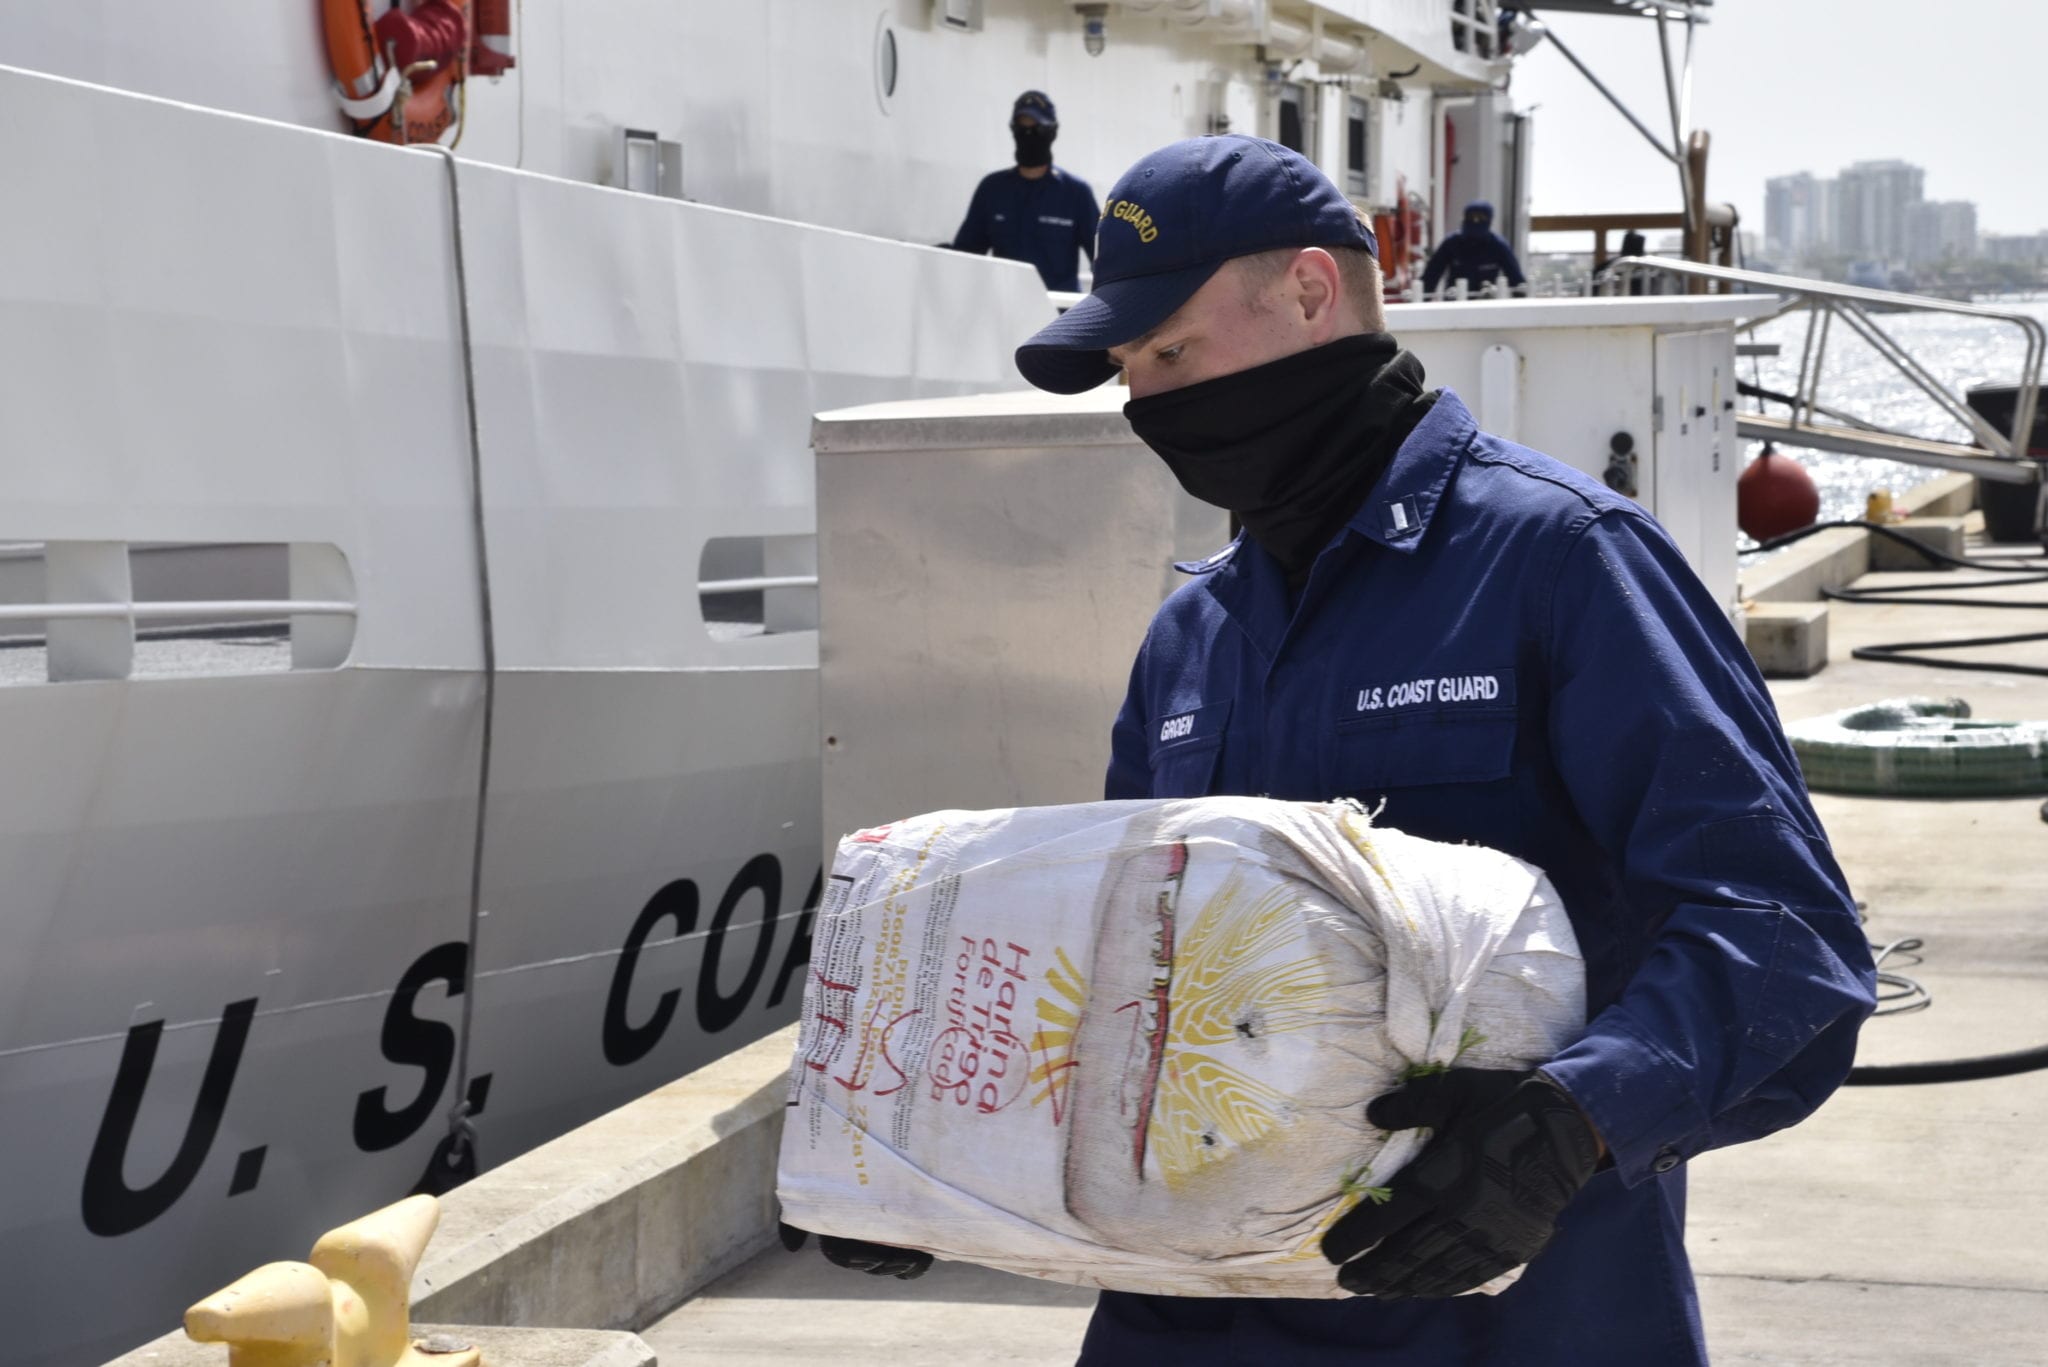 Coast Guard, Partners Interdict 7 Suspected Drug-Smuggling Vessels in the Caribbean over 10 days - Seapower